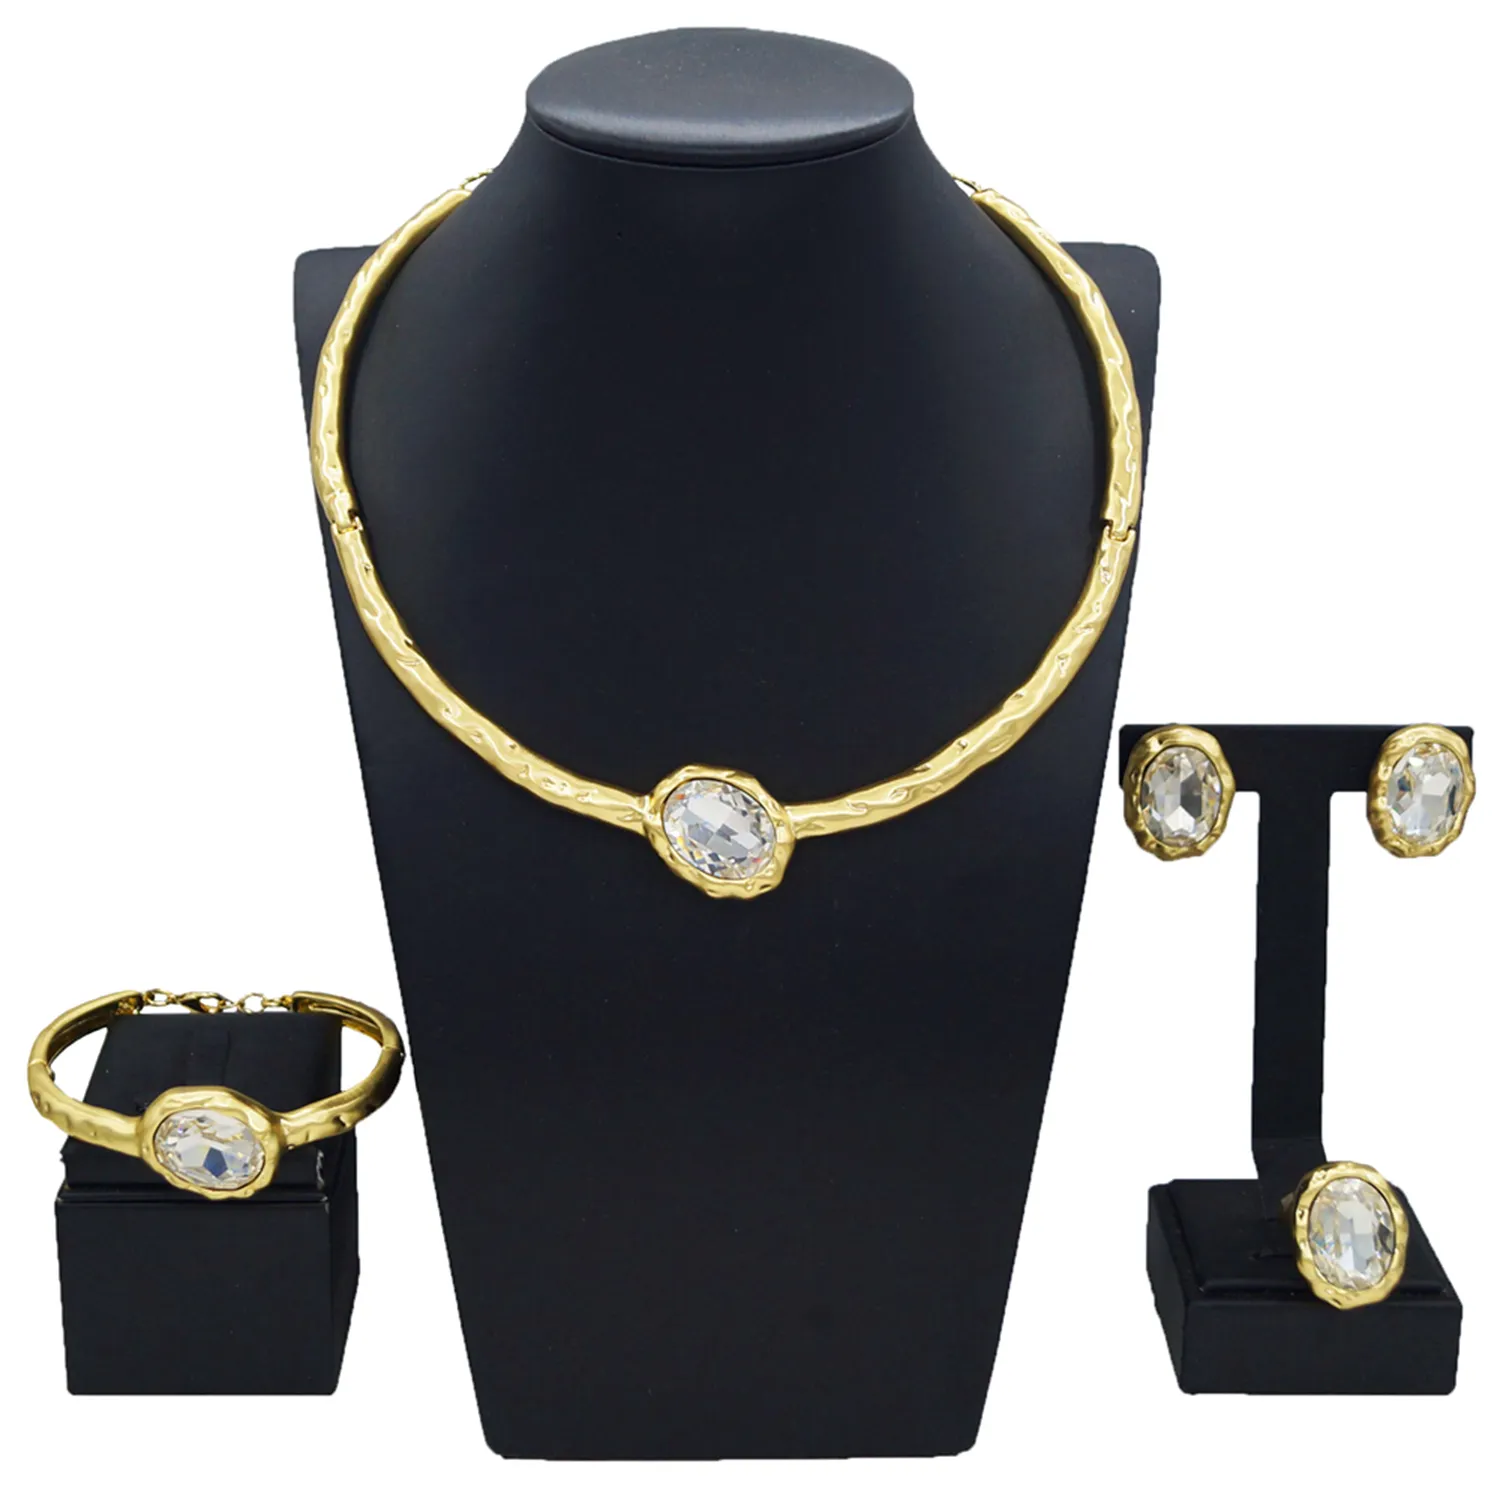 White Stone Simple Design Dubai Jewelry Accessories 24 K Gold Plated African Jewelry Sets Dubai Jewelry Display Necklace Sets